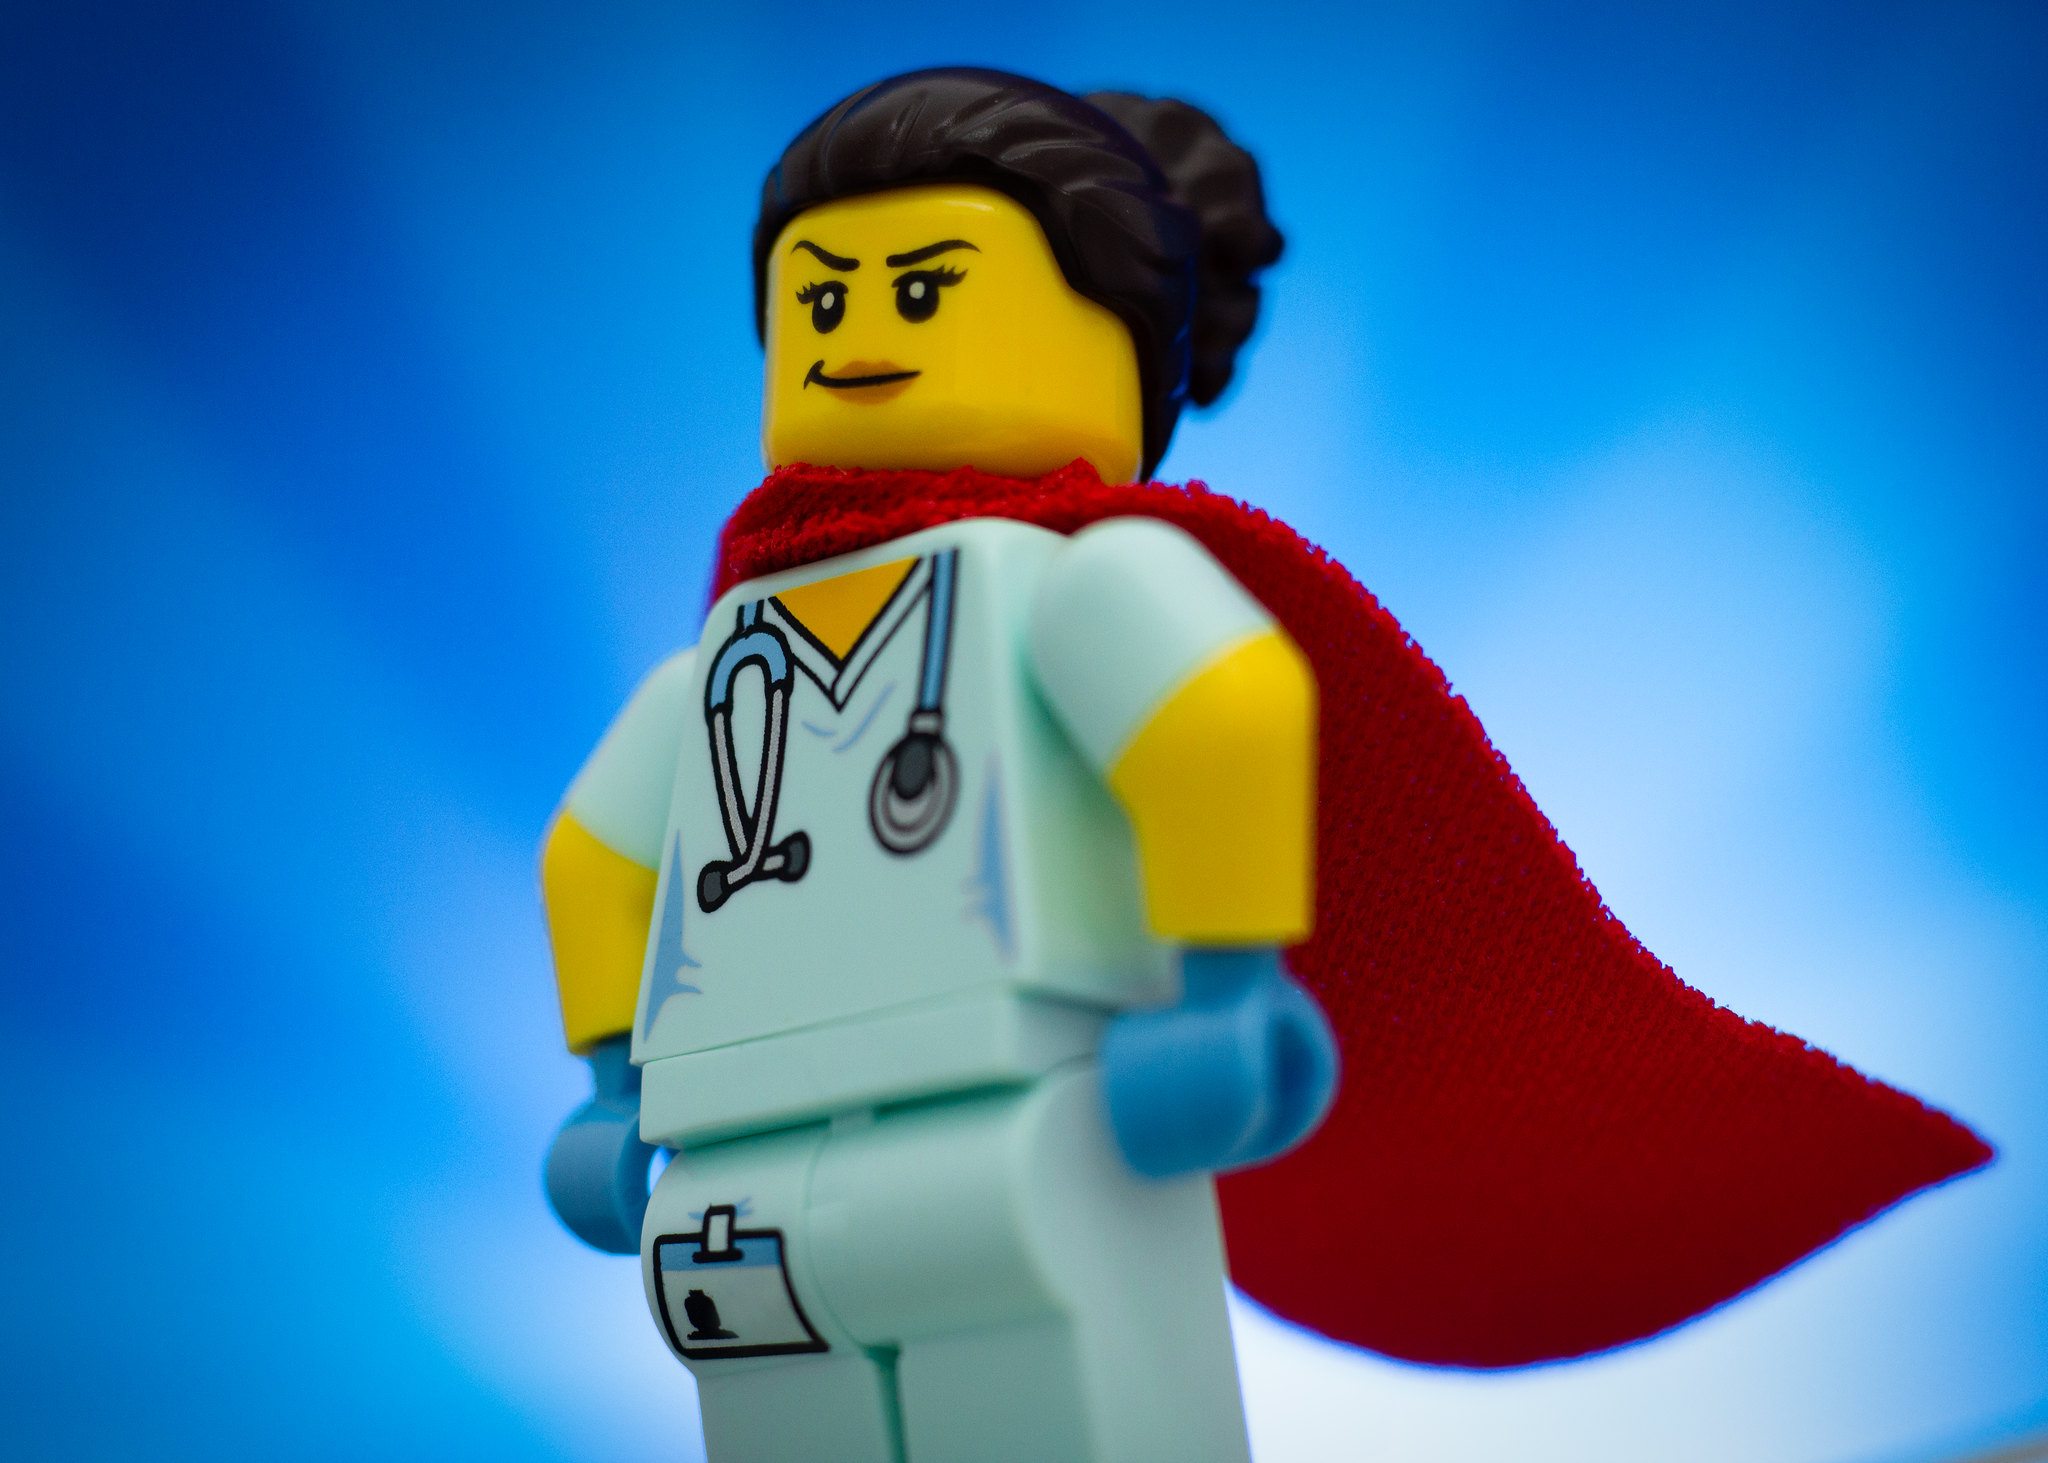 A LEGO doctor in a cape, who knows how to treat DOMS.